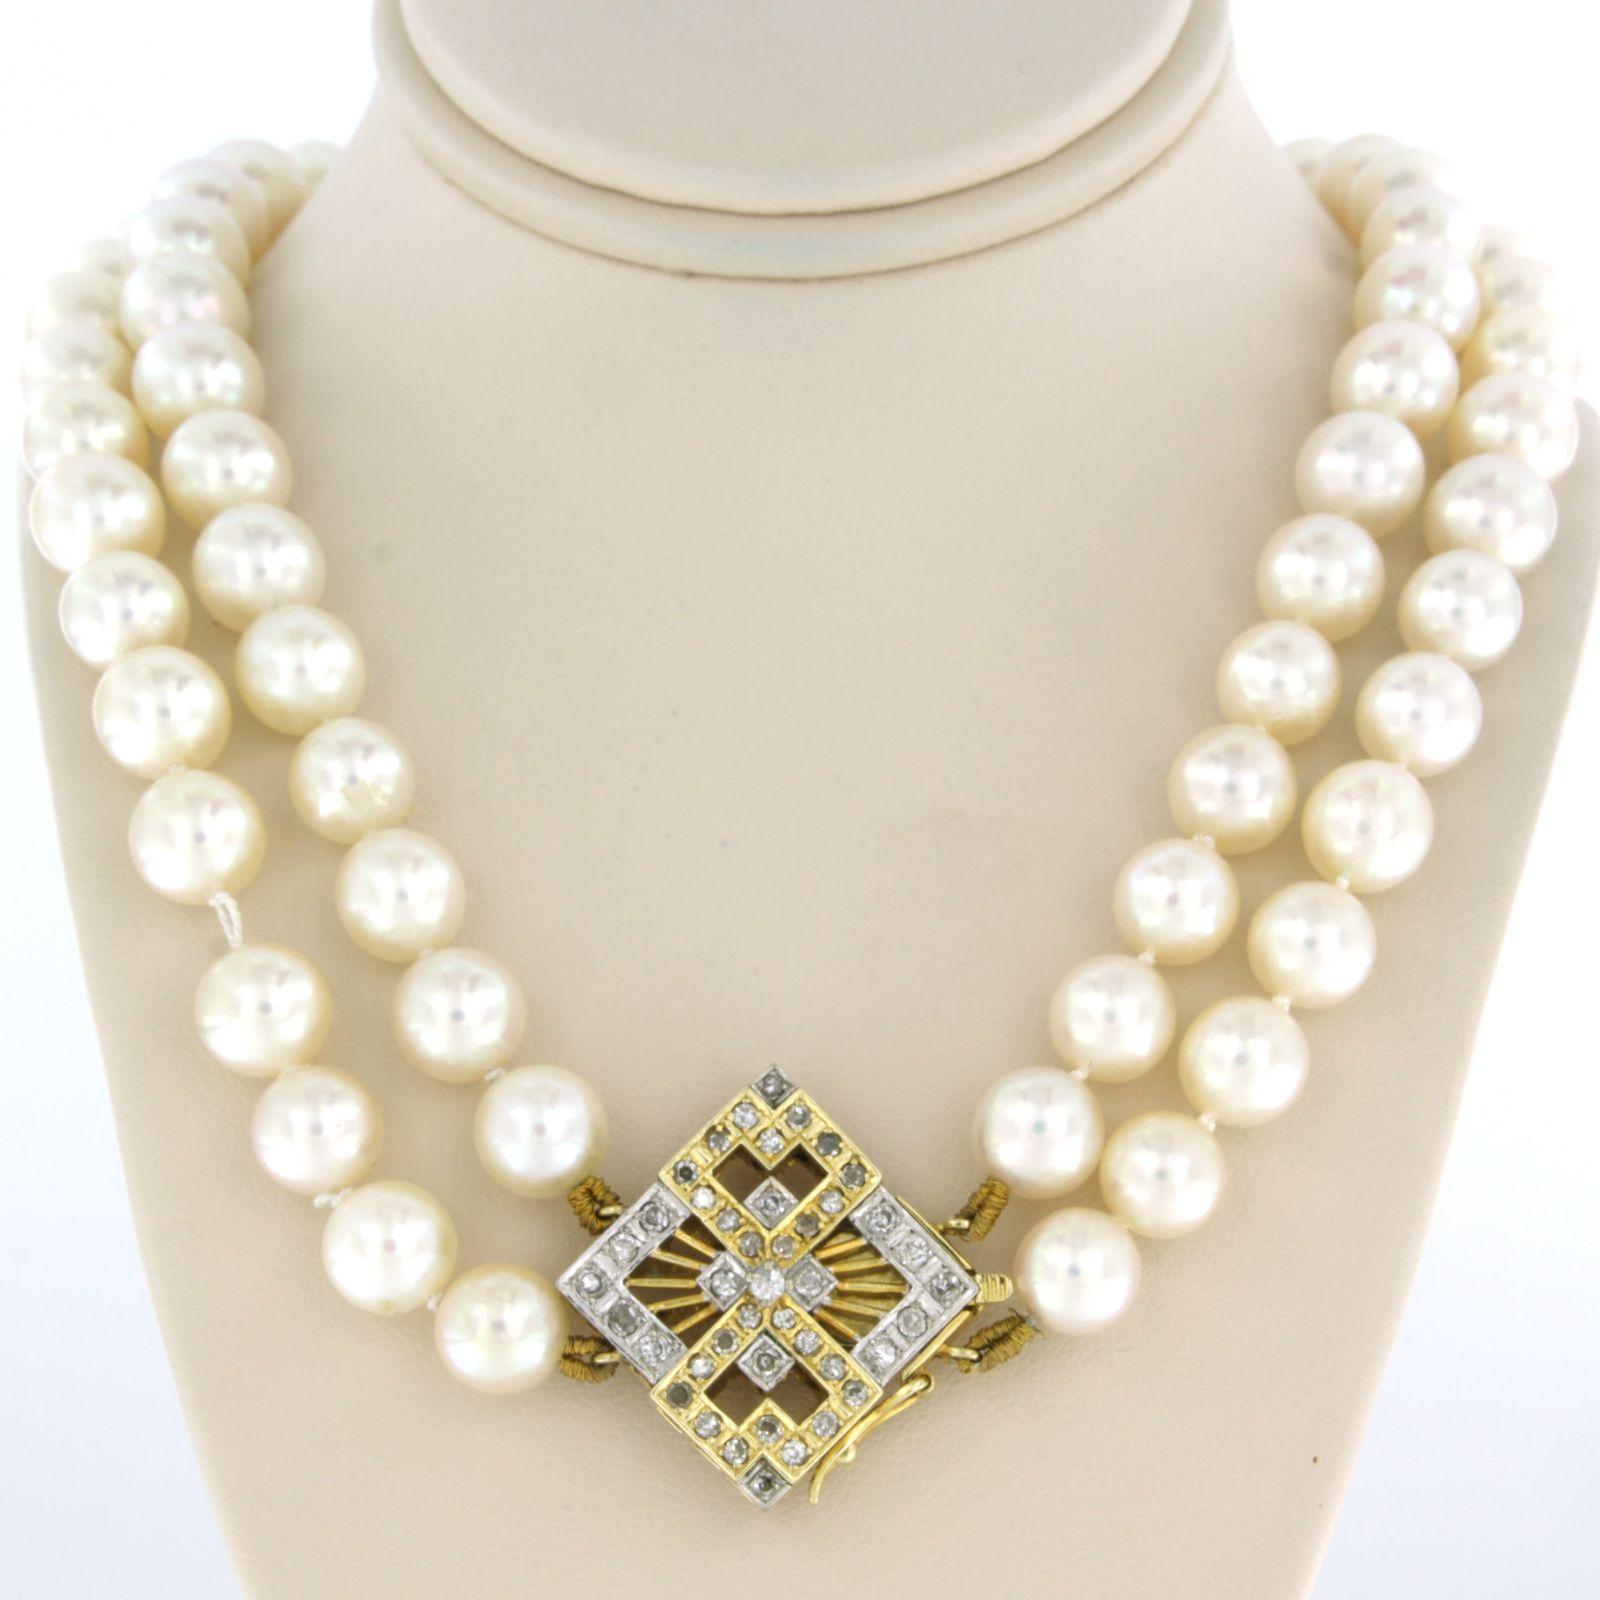 14k bicolor gold lock set with single cut diamonds up to . 0.80ct - G/H - VS/SI - on a 2-strand pearl necklace - 43 cm long

detailed description:

The pearl necklace is 43 cm long, with bicolour 14k gold clasp

dimensions of the lock are 2.5 cm by